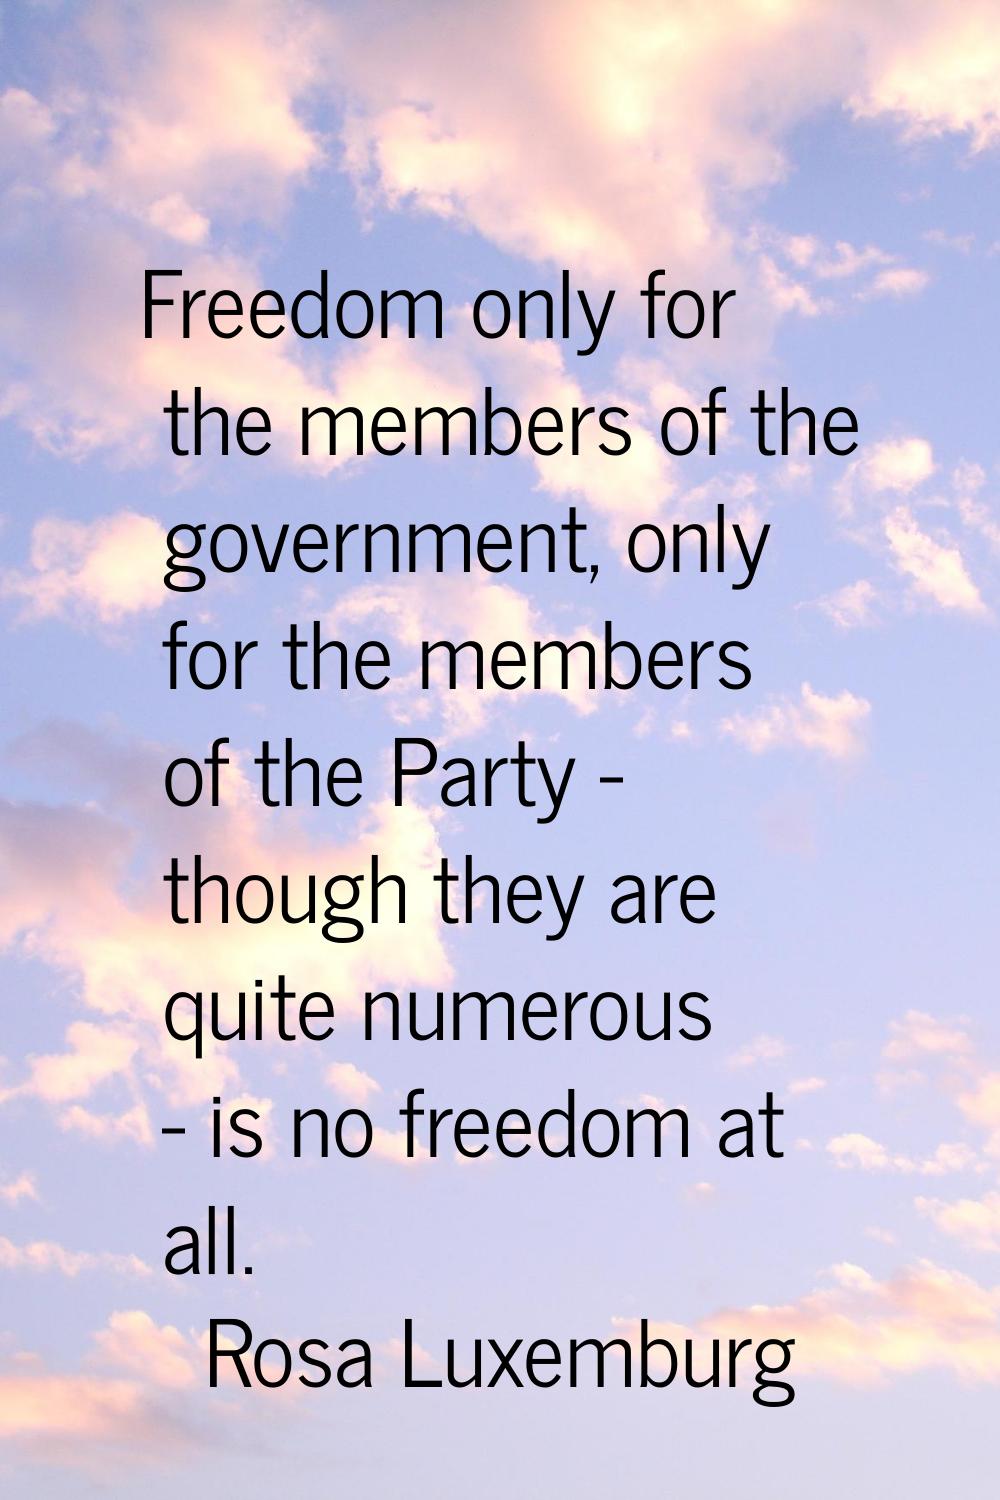 Freedom only for the members of the government, only for the members of the Party - though they are